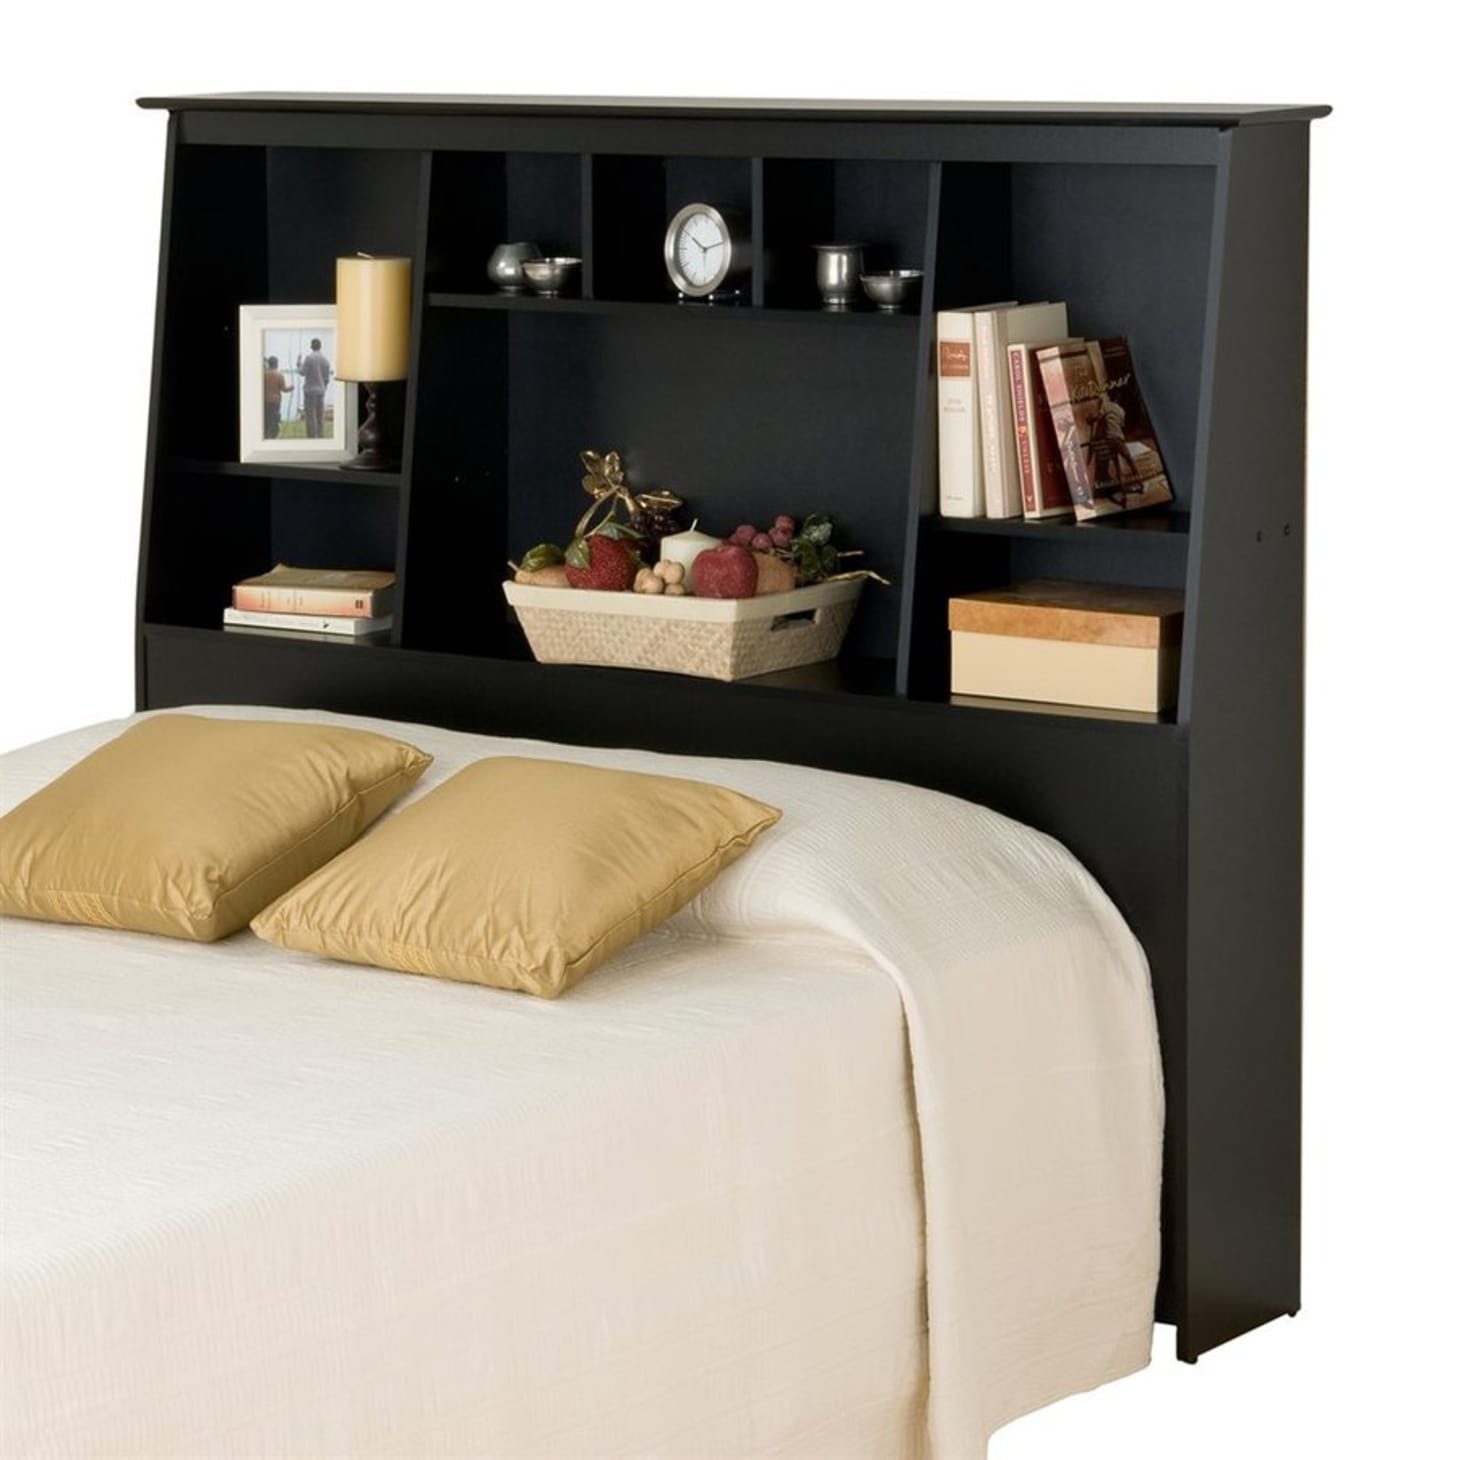 Bookcase Headboard Storage Ideas By Budget Apartment Therapy